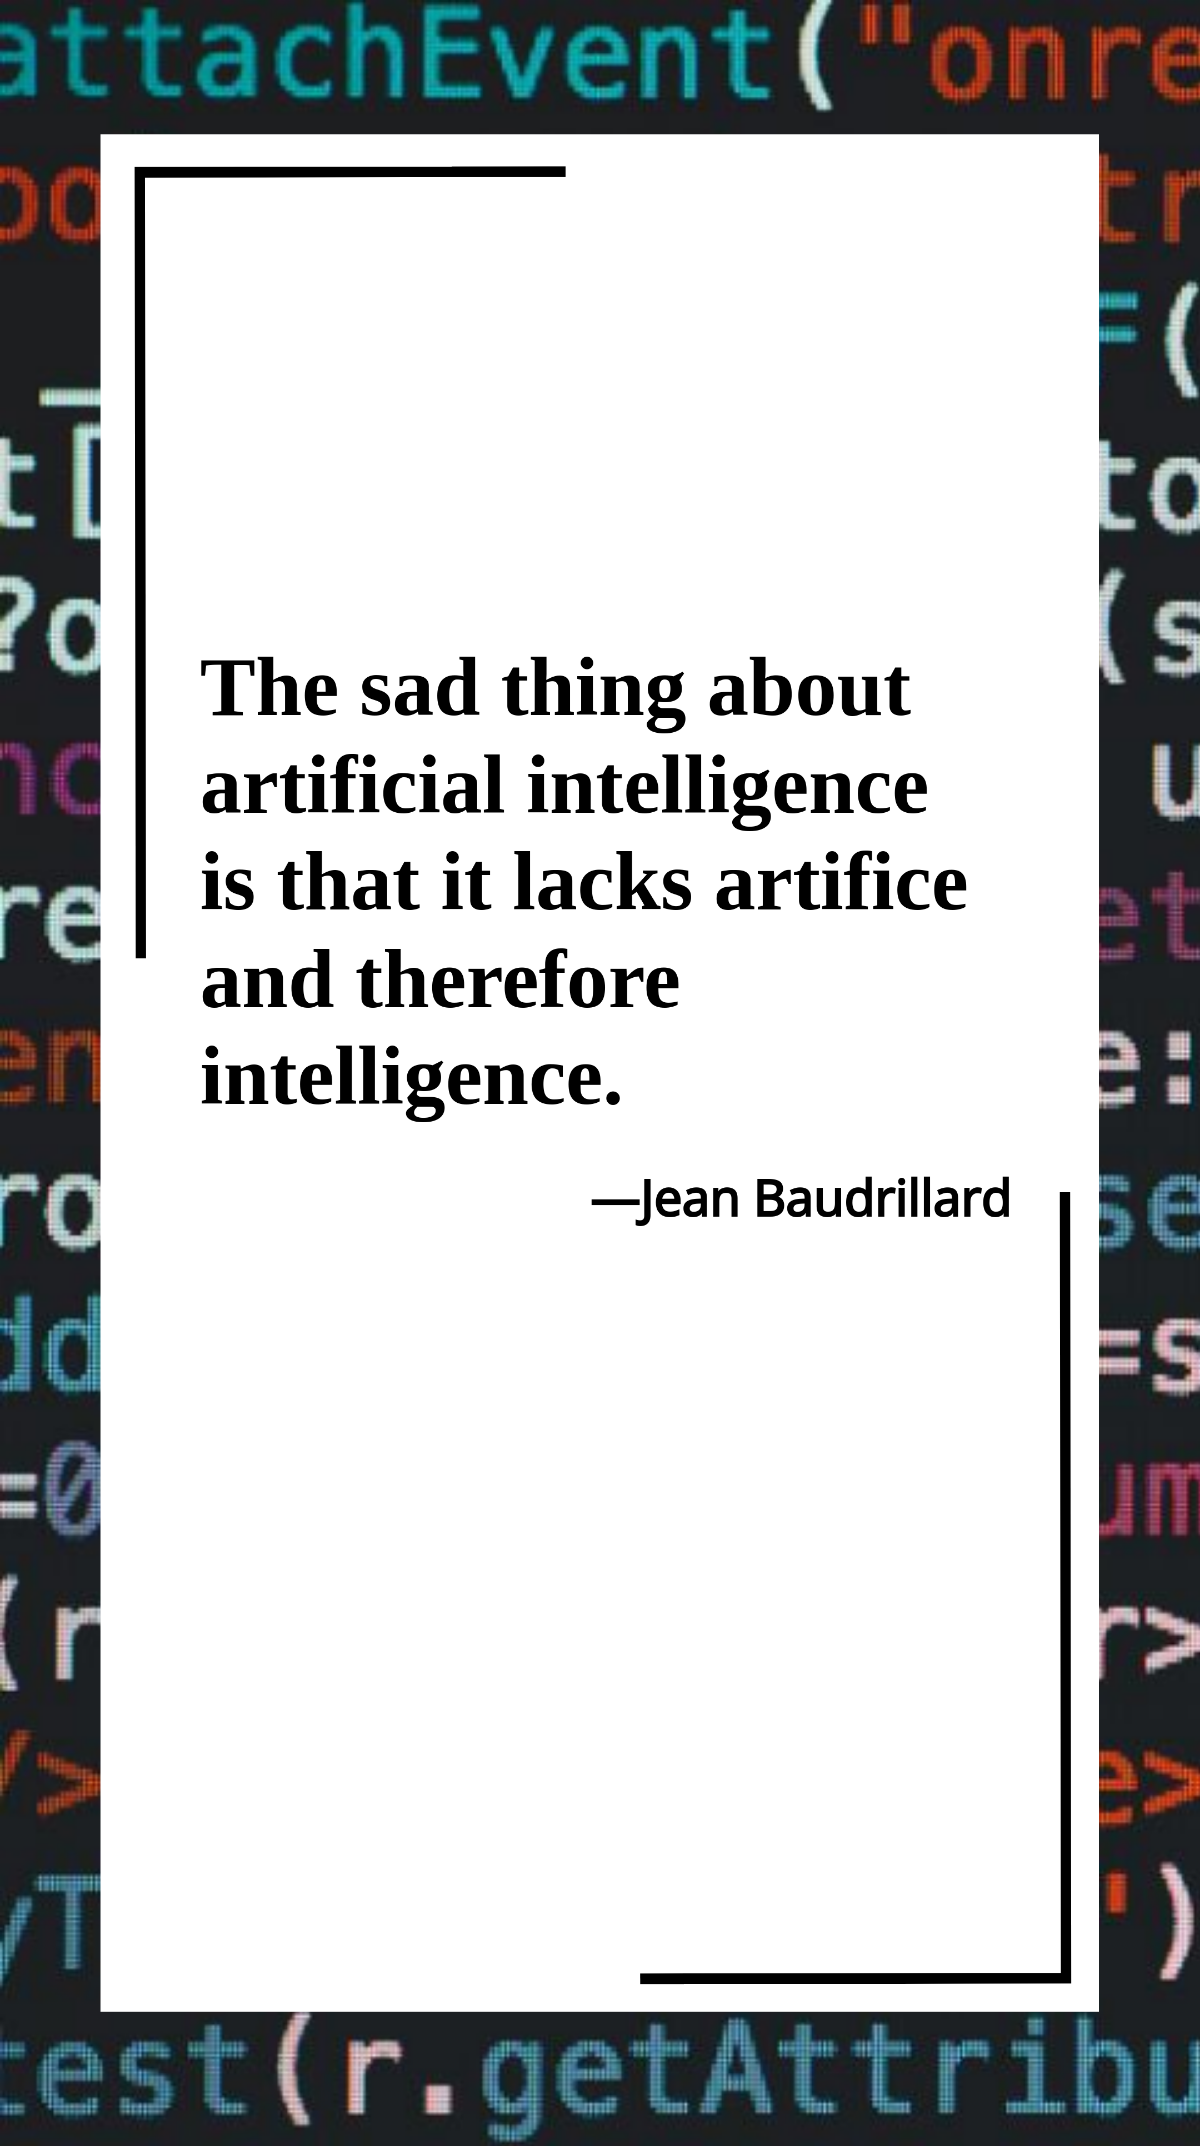 Jean Baudrillard - The sad thing about artificial intelligence is that it lacks artifice and therefore intelligence. Template